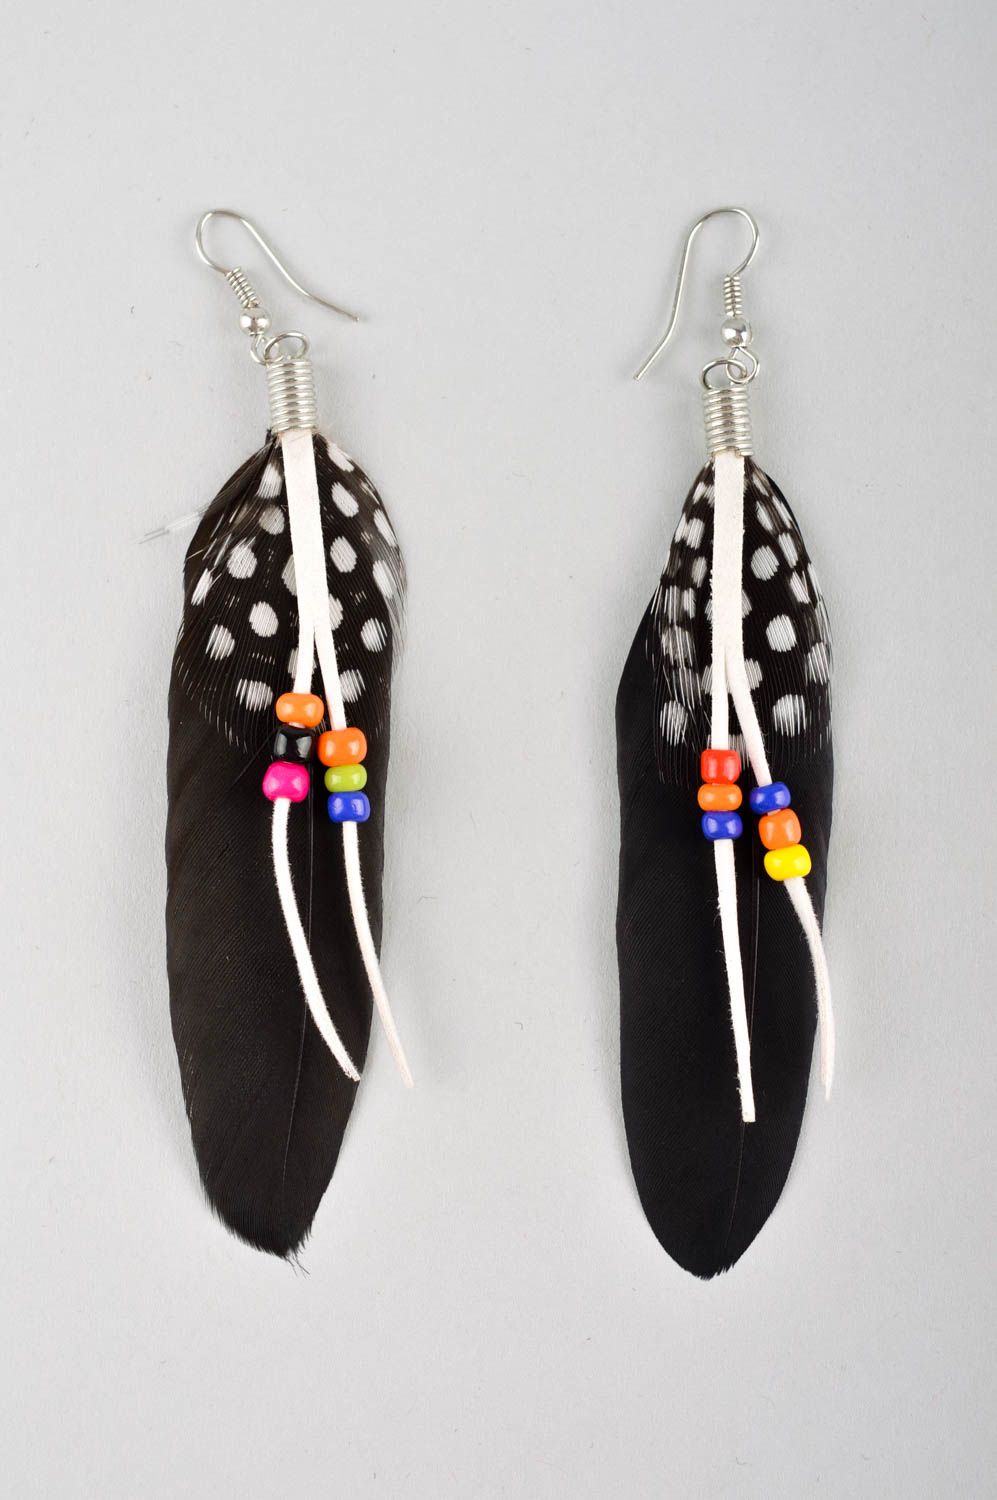 Handmade earrings with charms feather earrings long earrings feather accessories photo 3